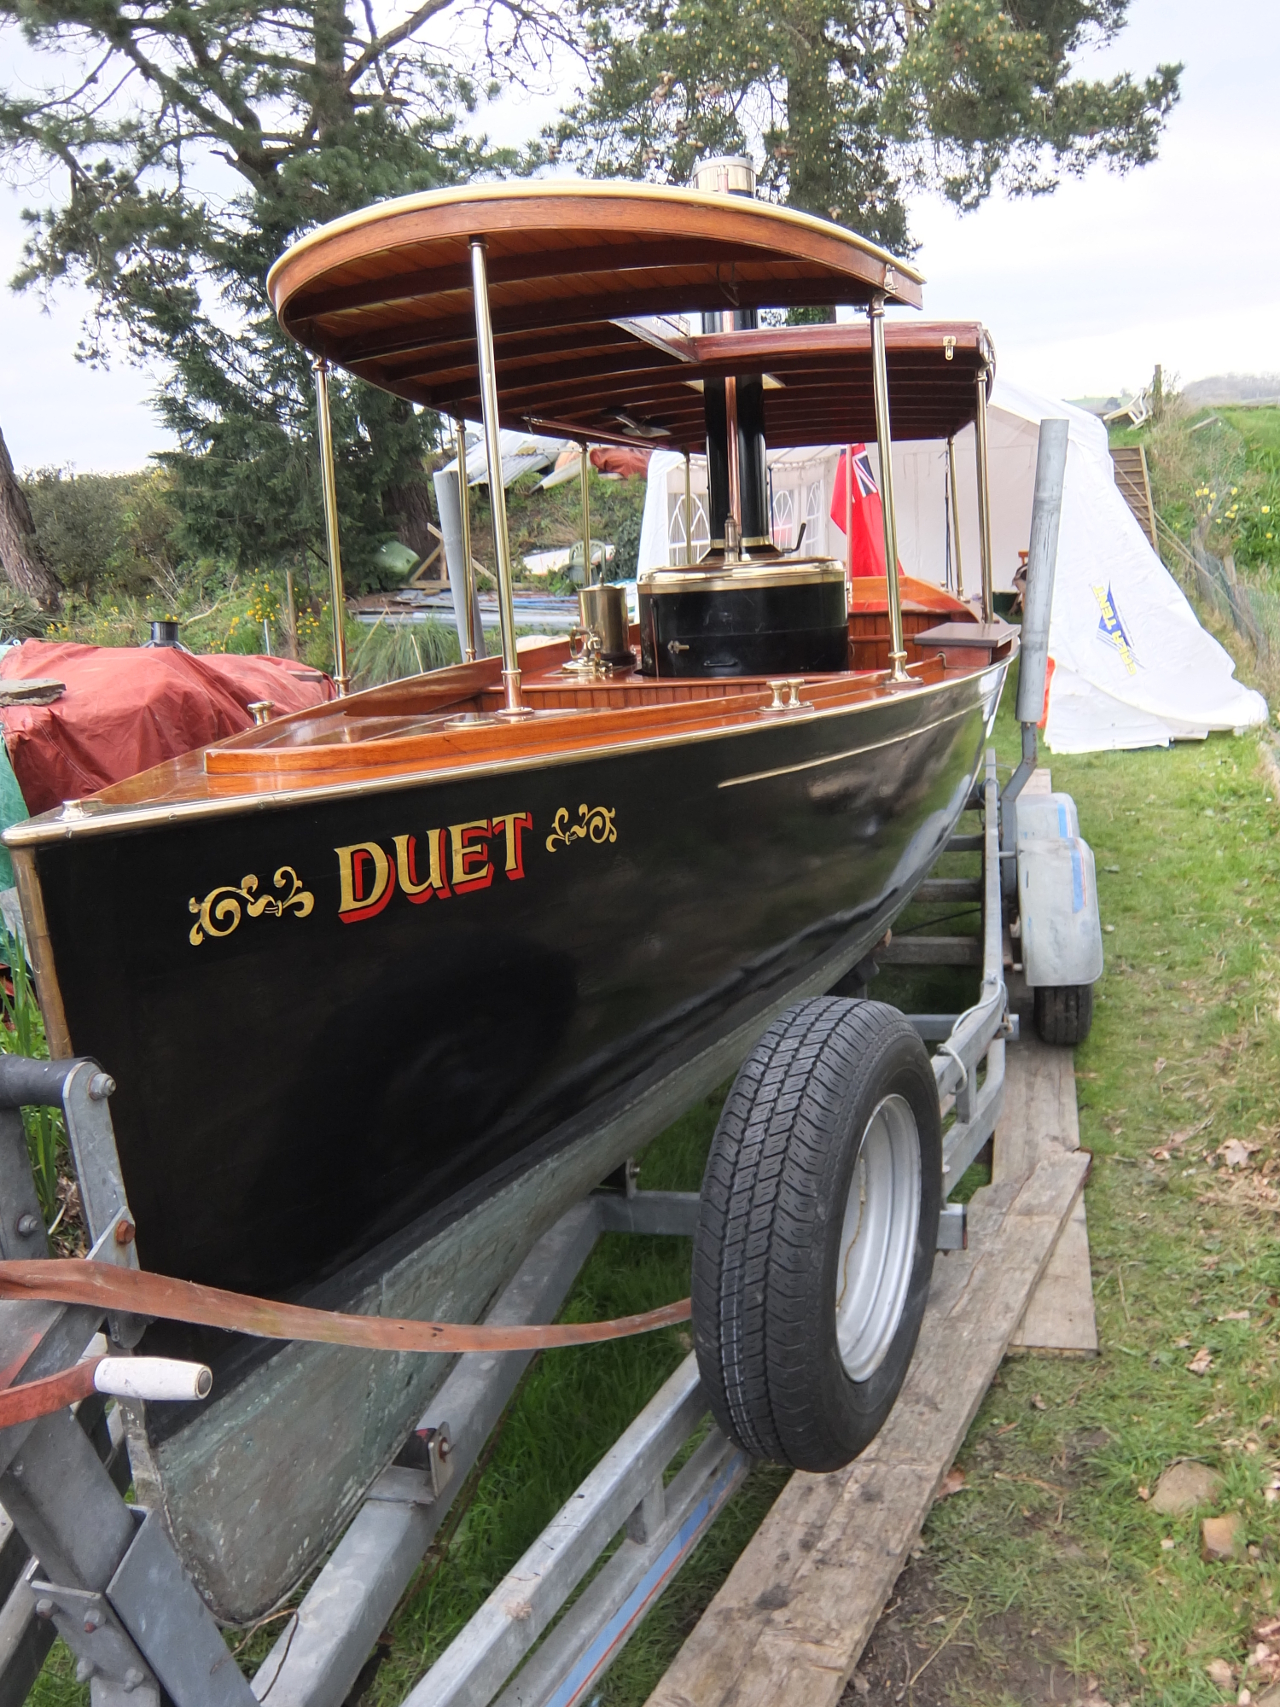 Duet comes with a purpose built trailer with docking legs to make launching and recovery easy.